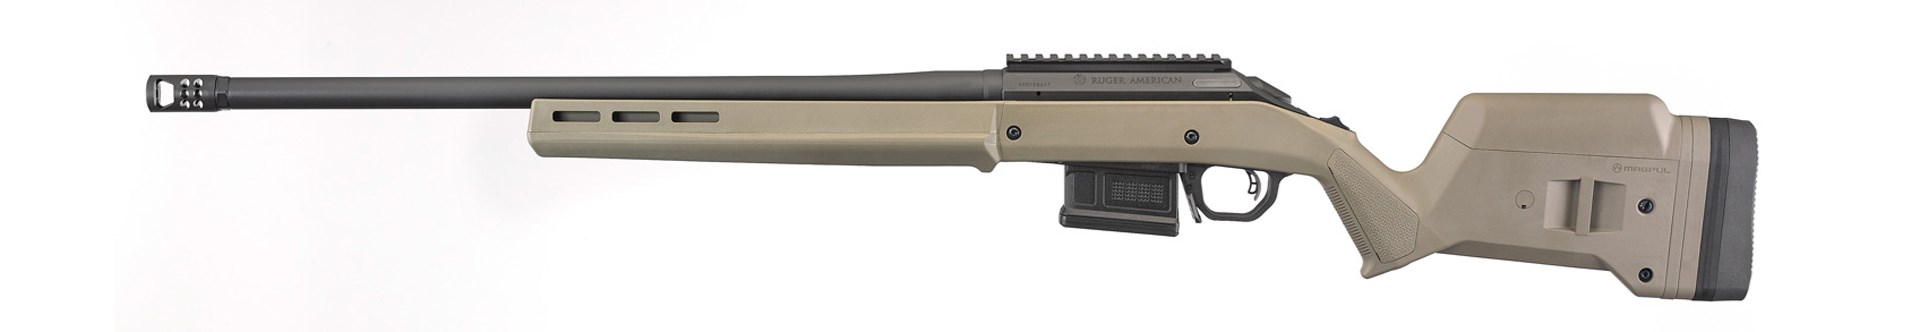 Left-side view of Davidson's Exclusive Ruger American Hunter bolt-action rifle flat dark earth color magpul hunter stock black barrel black action shown on white background